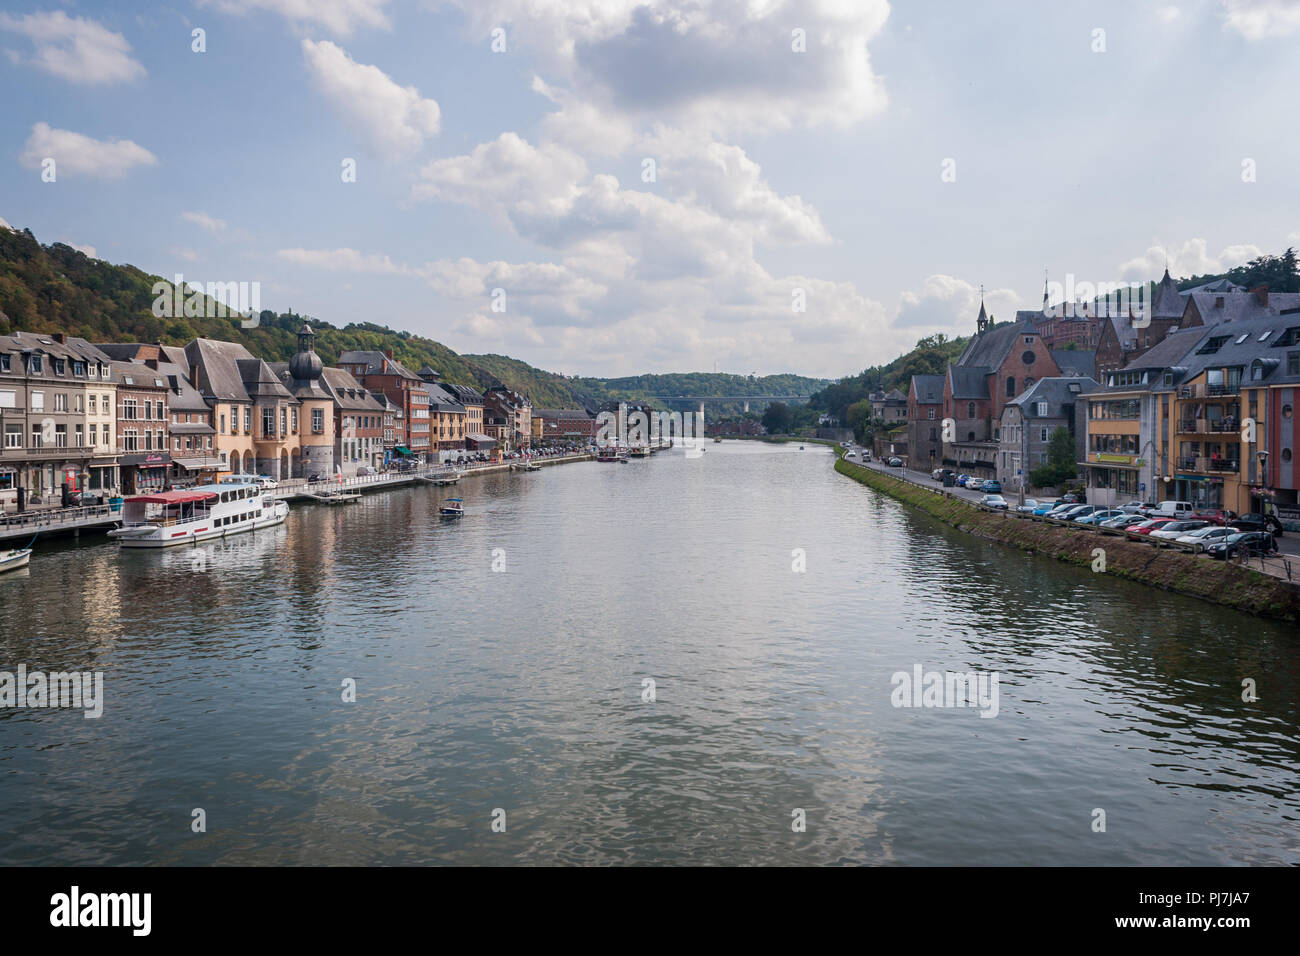 Looking down the River Meuse in Dinant, Belgium, from famous Saxophone Bridge on a sunny day. Stock Photo